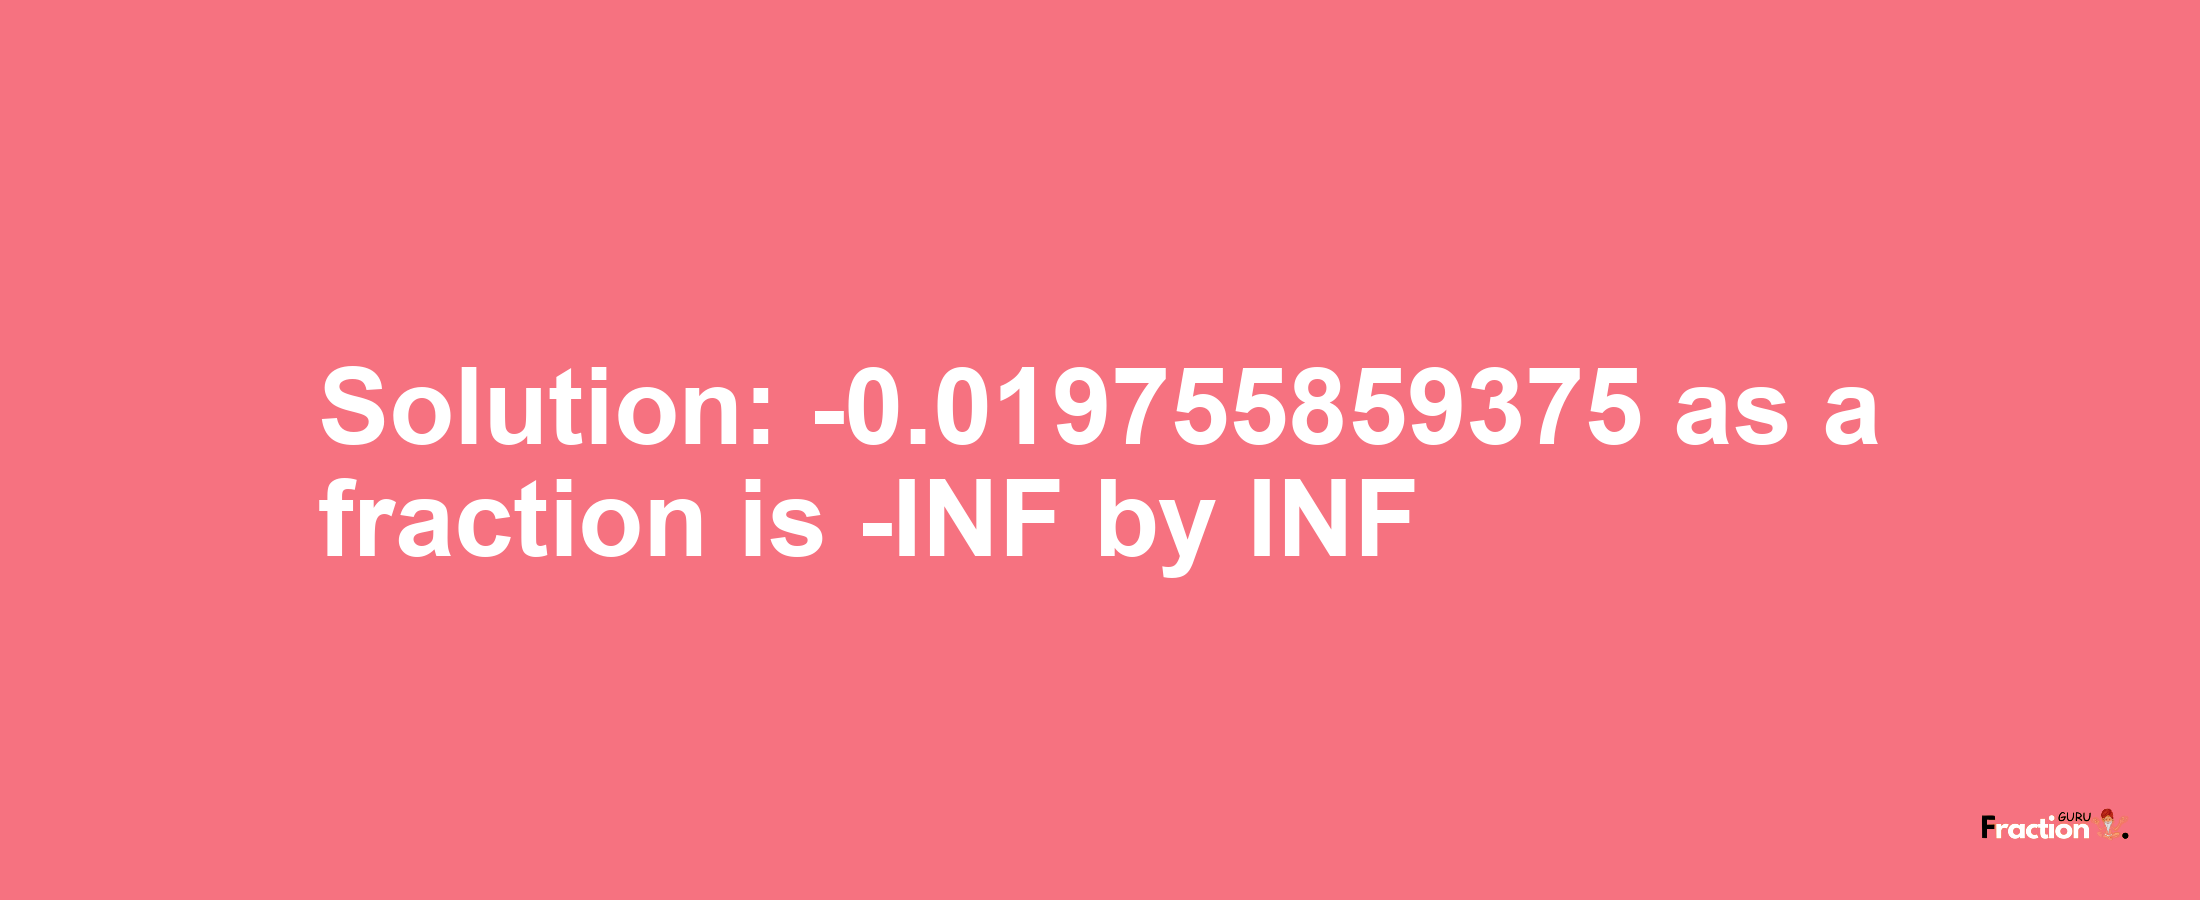 Solution:-0.019755859375 as a fraction is -INF/INF